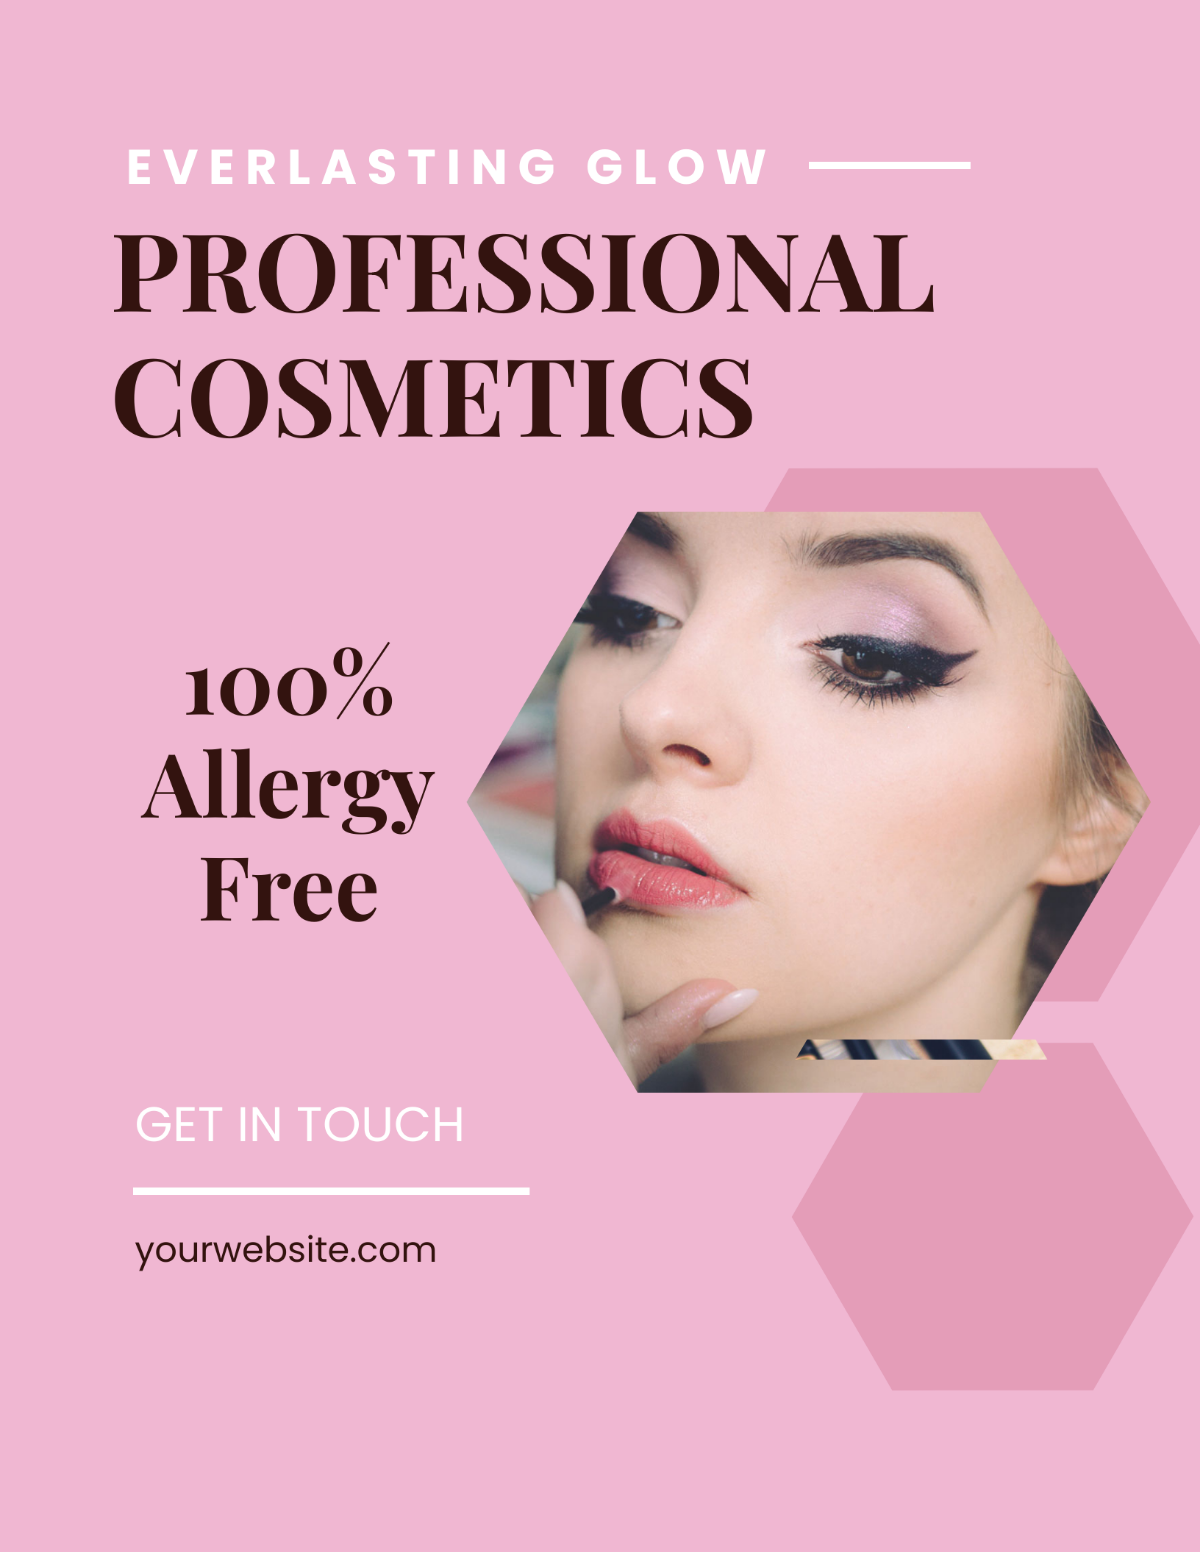 Professional Cosmetics Flyer Template